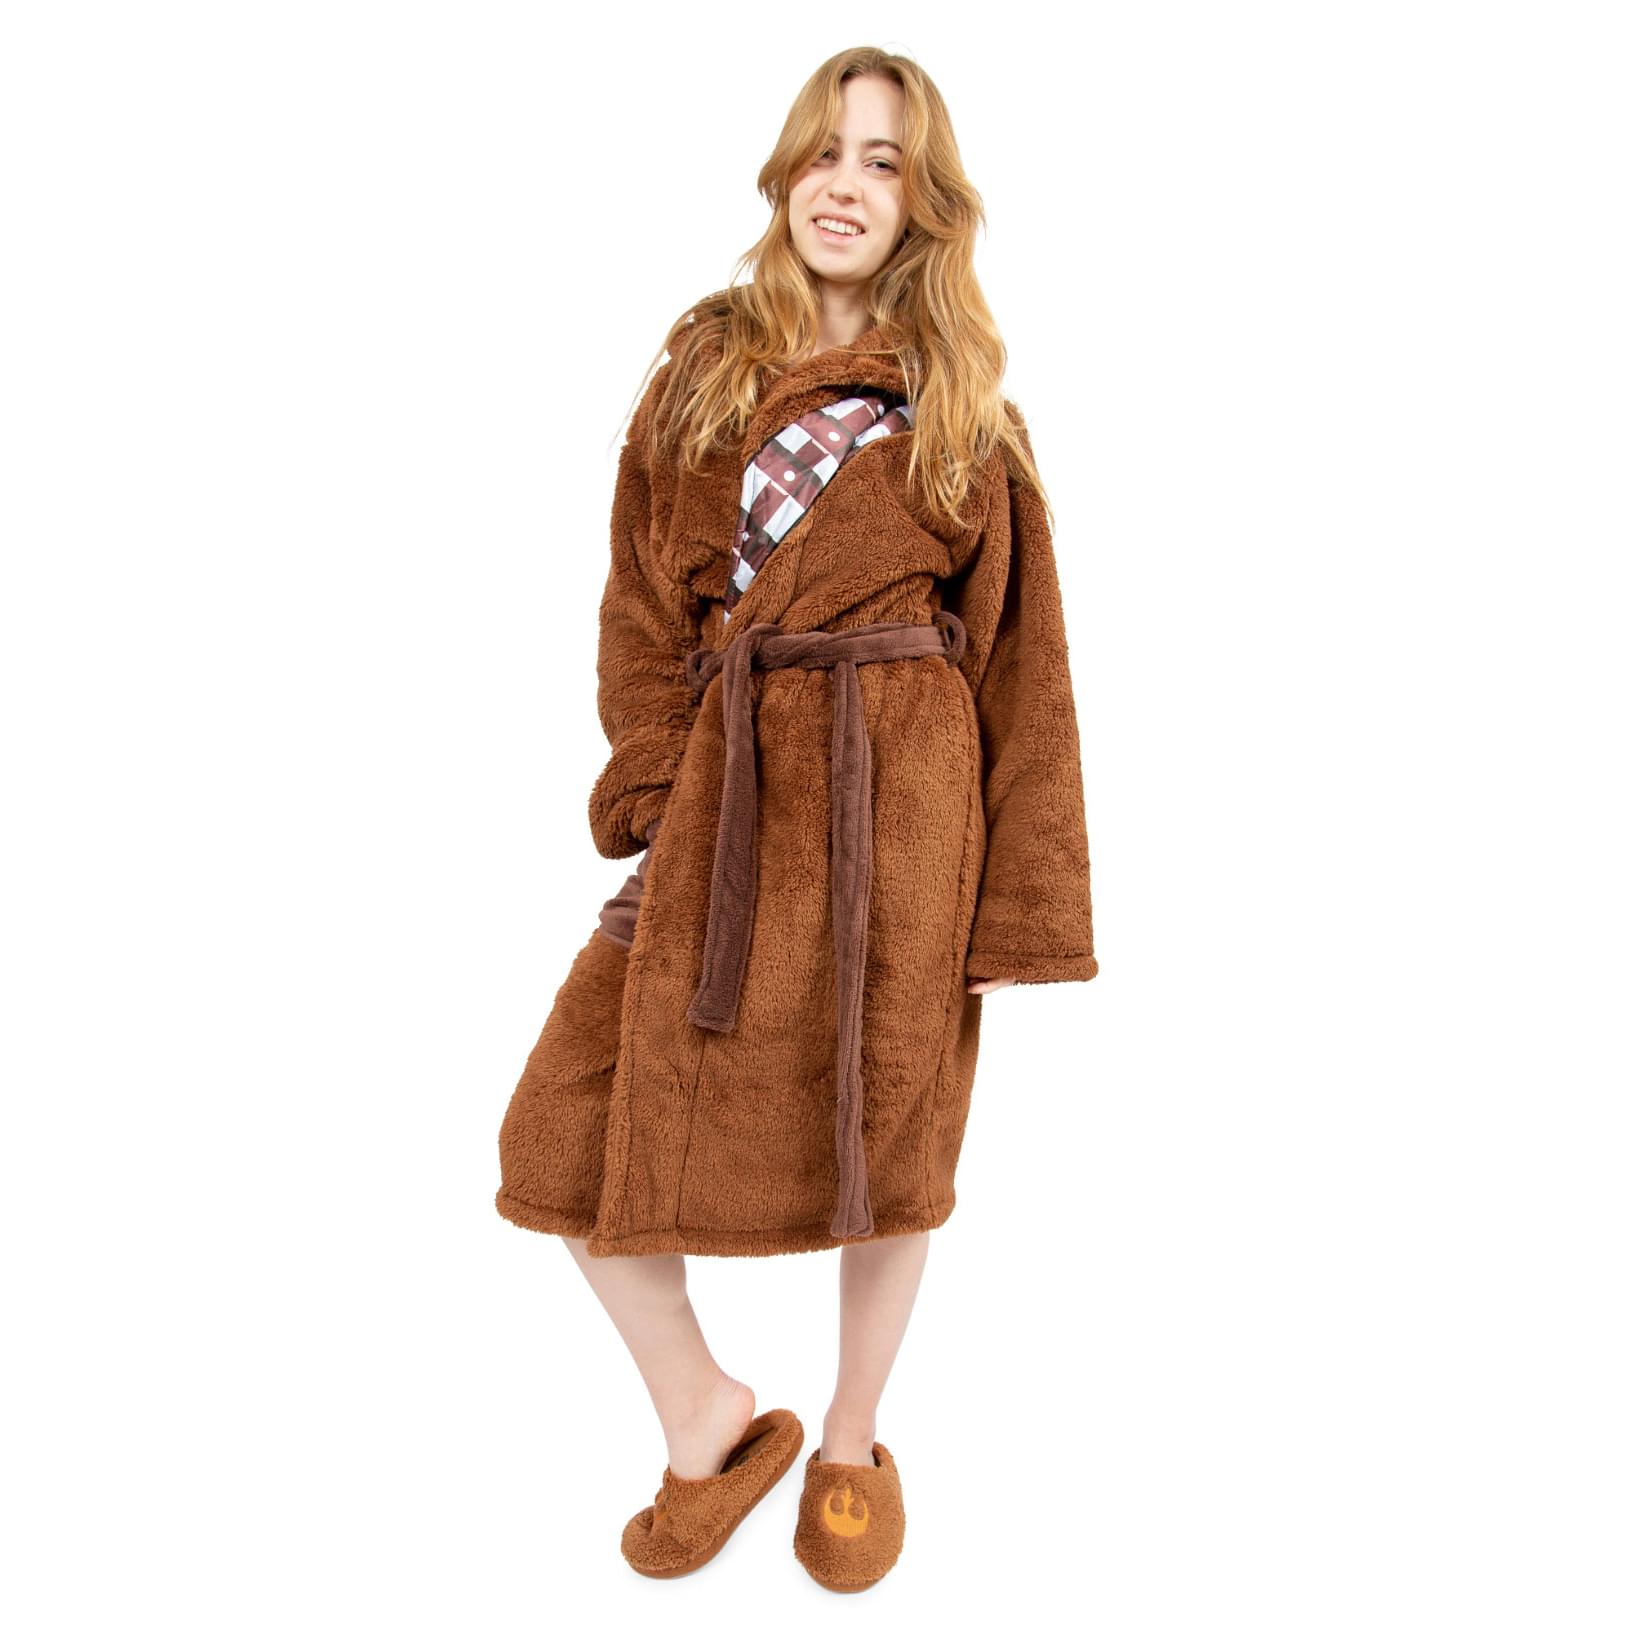 Star Wars Chewbacca Robe and Slipper Set for Adults